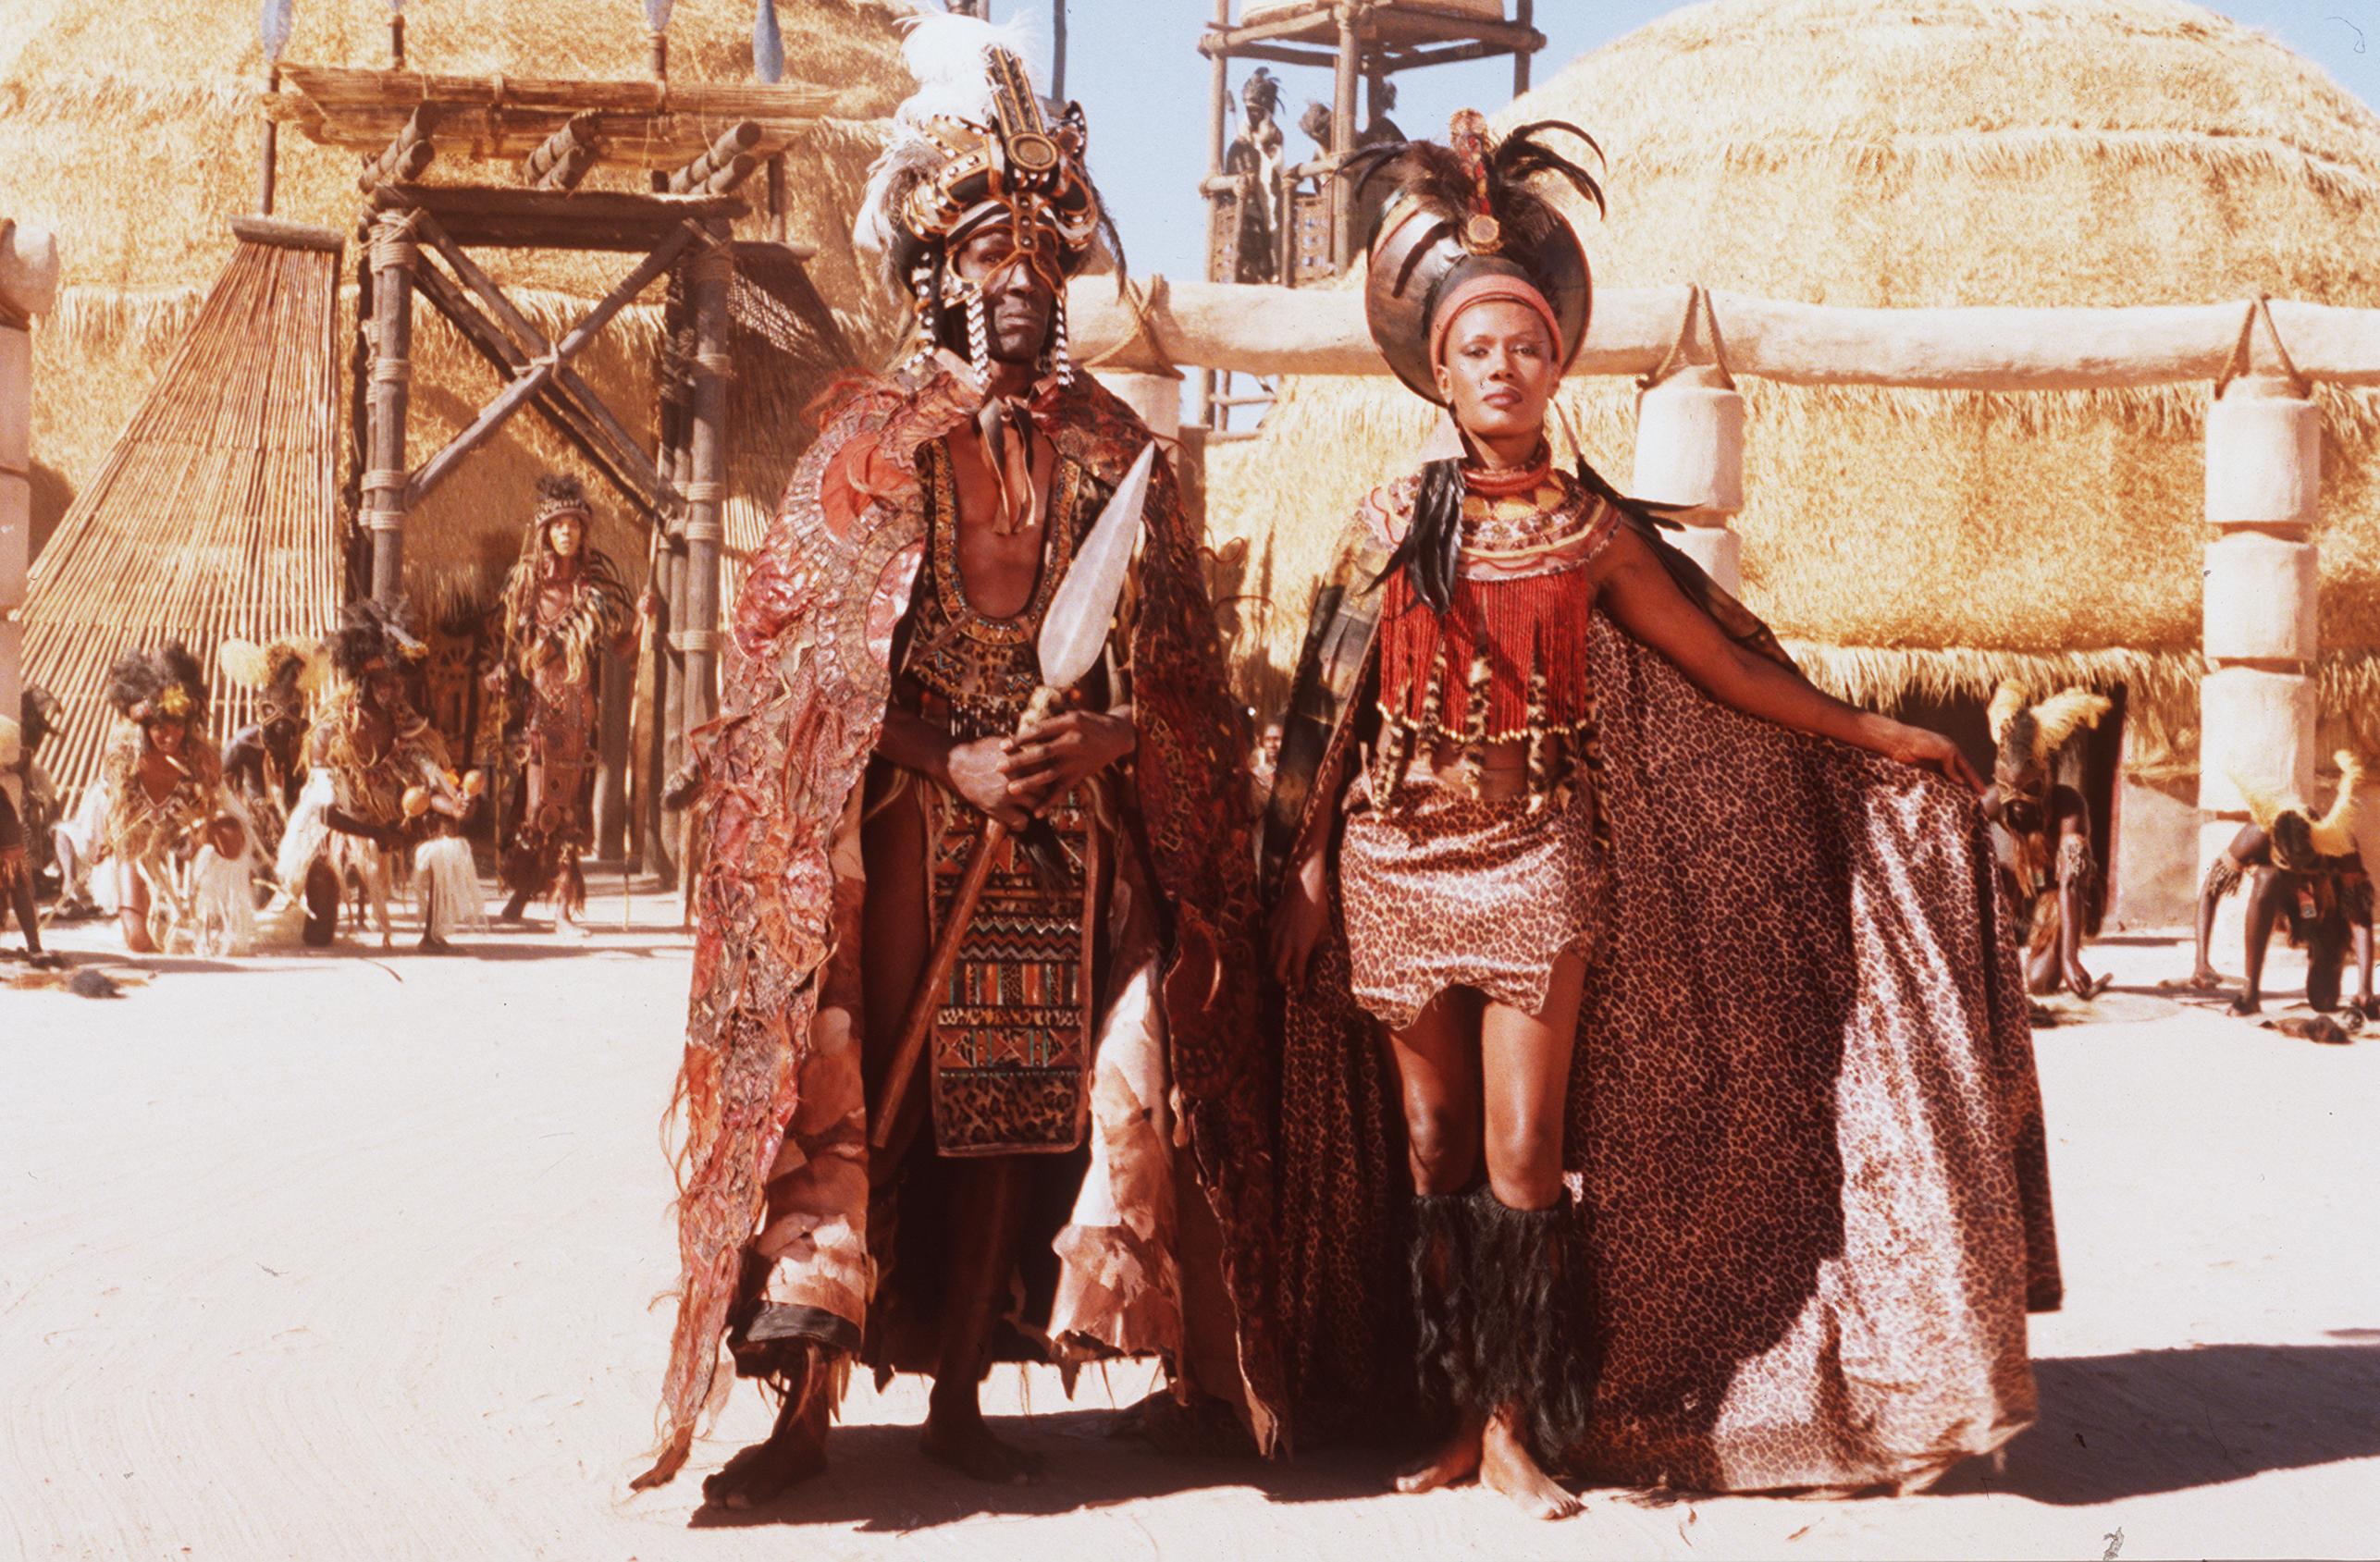 March 1999 Cannes, France. Shaka Zulu: The Citadel, The Epic Mini-Series Chronicling The Life Of The Legendary Chieftain. Stars Grace Jones And Henry Cele. Global Entertainment. 1999 (Photo By Getty Images)